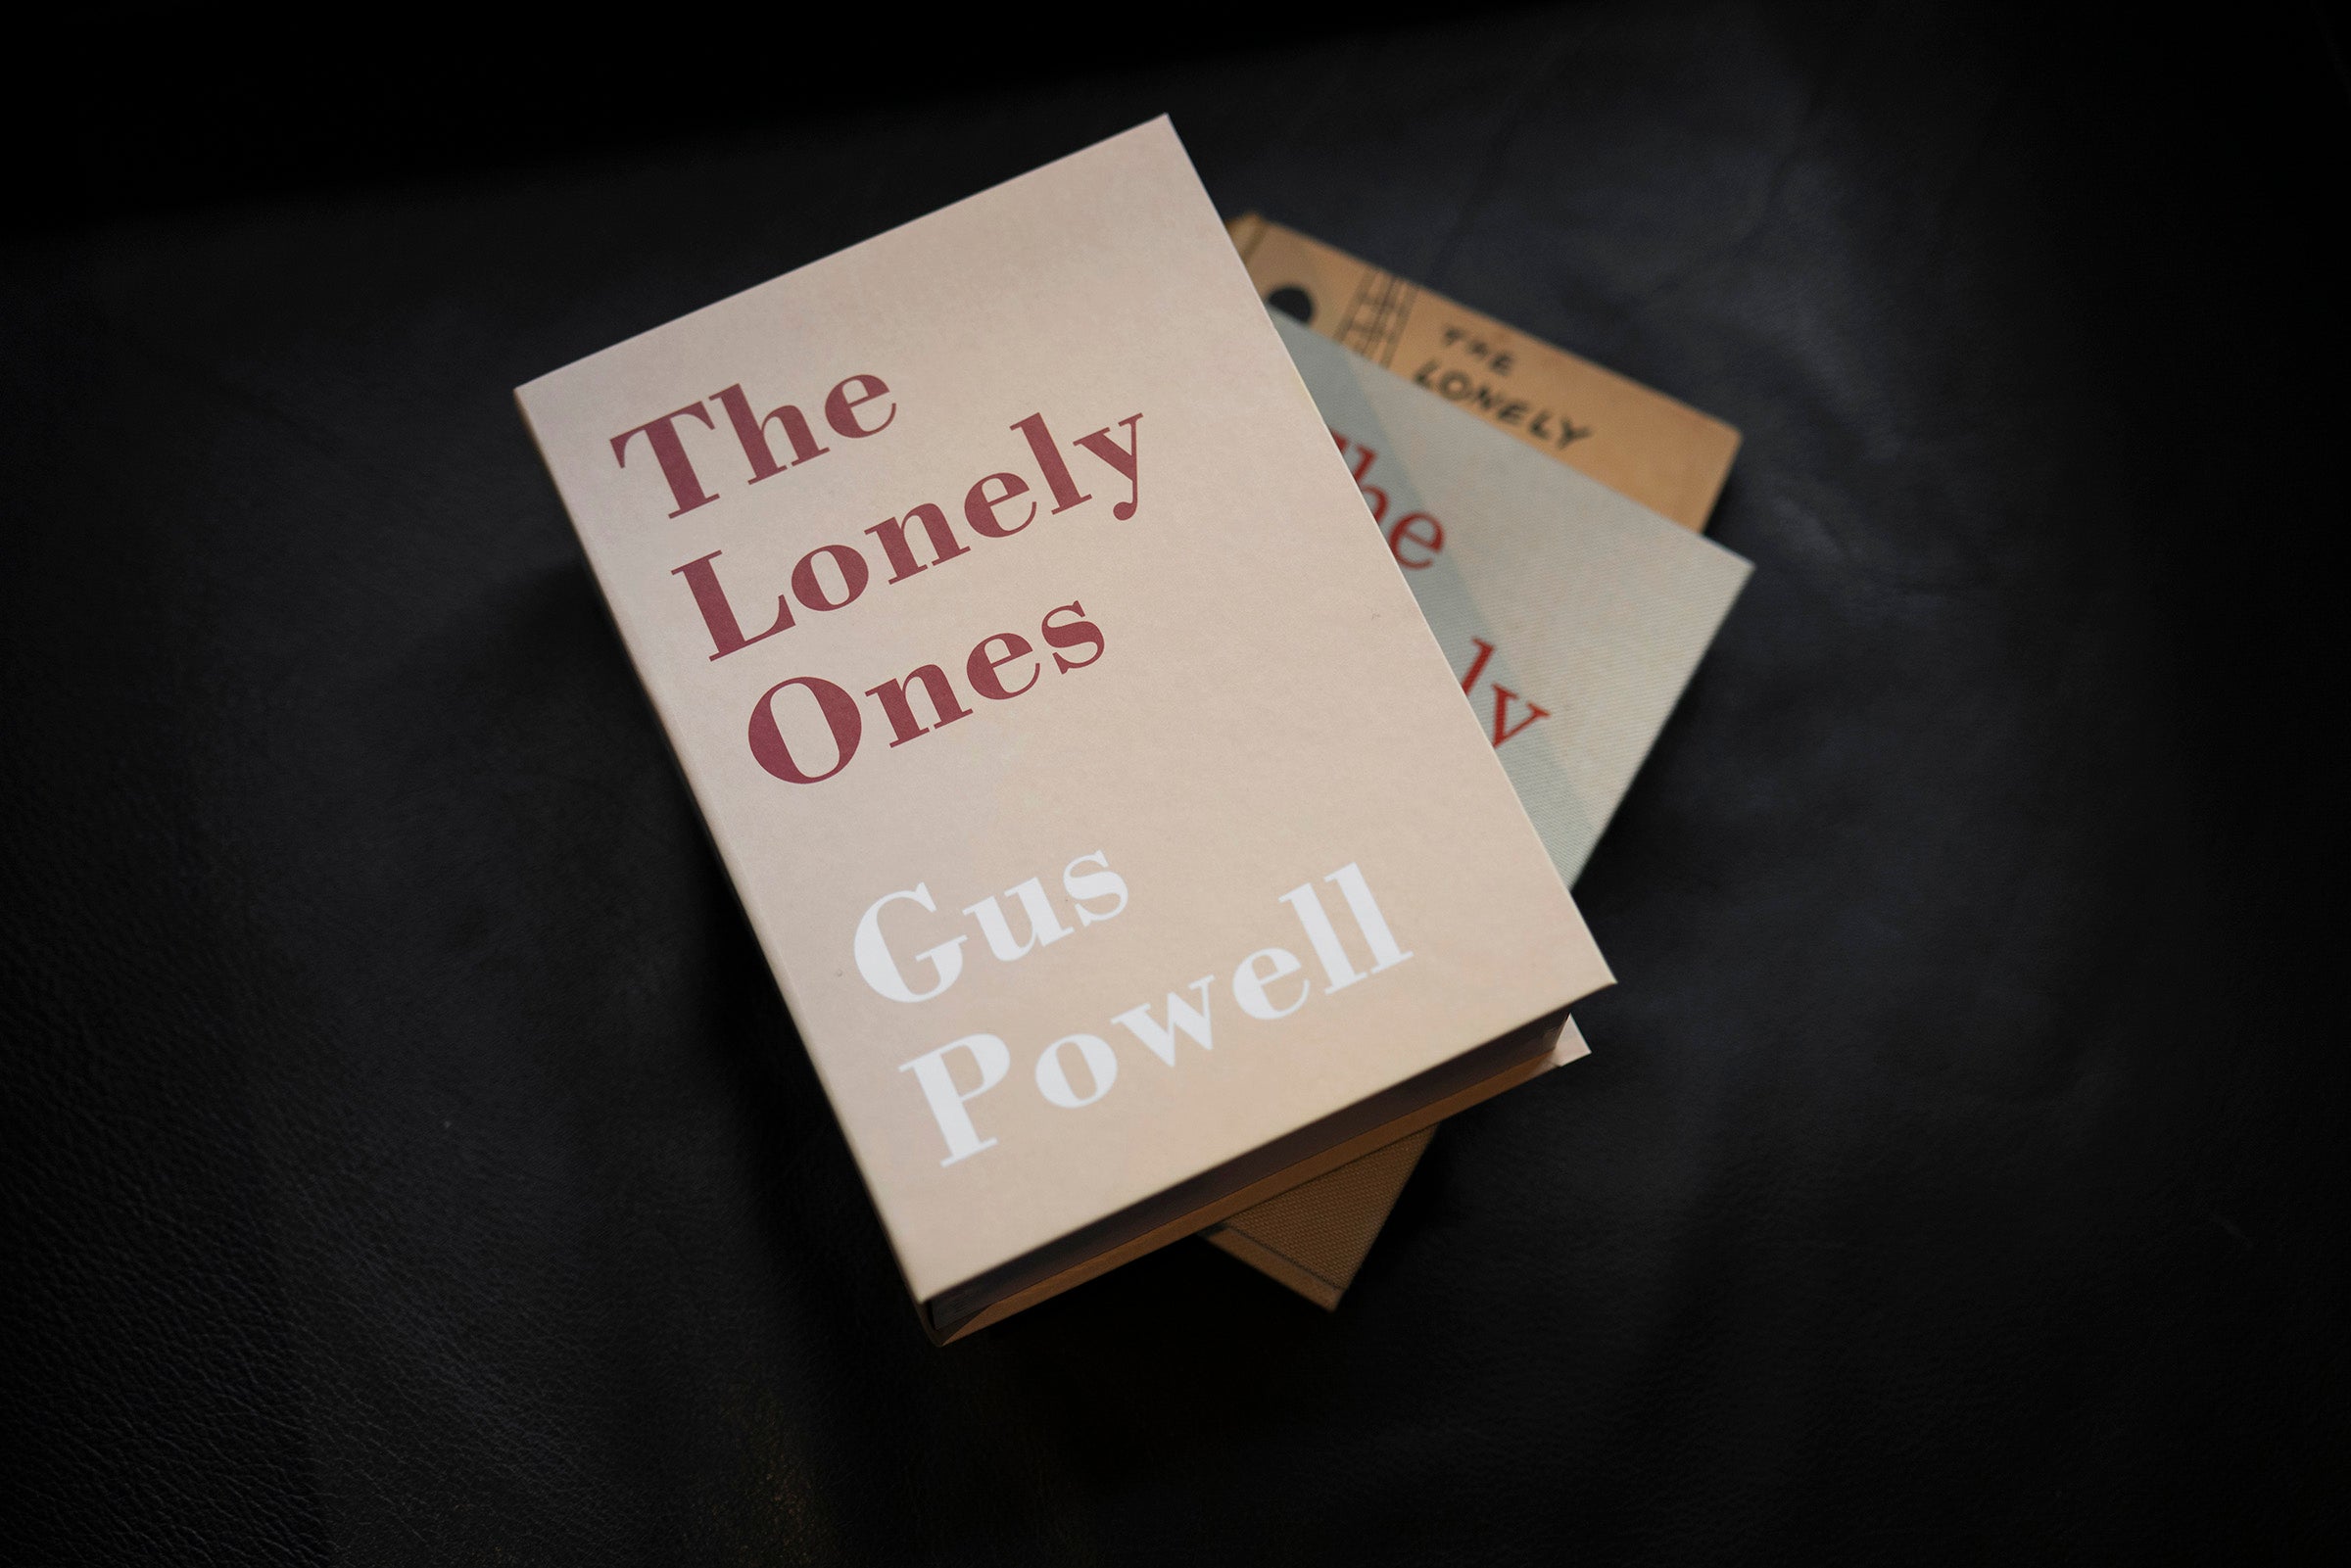 Gus Powell, The Lonely Ones, Real Fake Ed. Volume 1